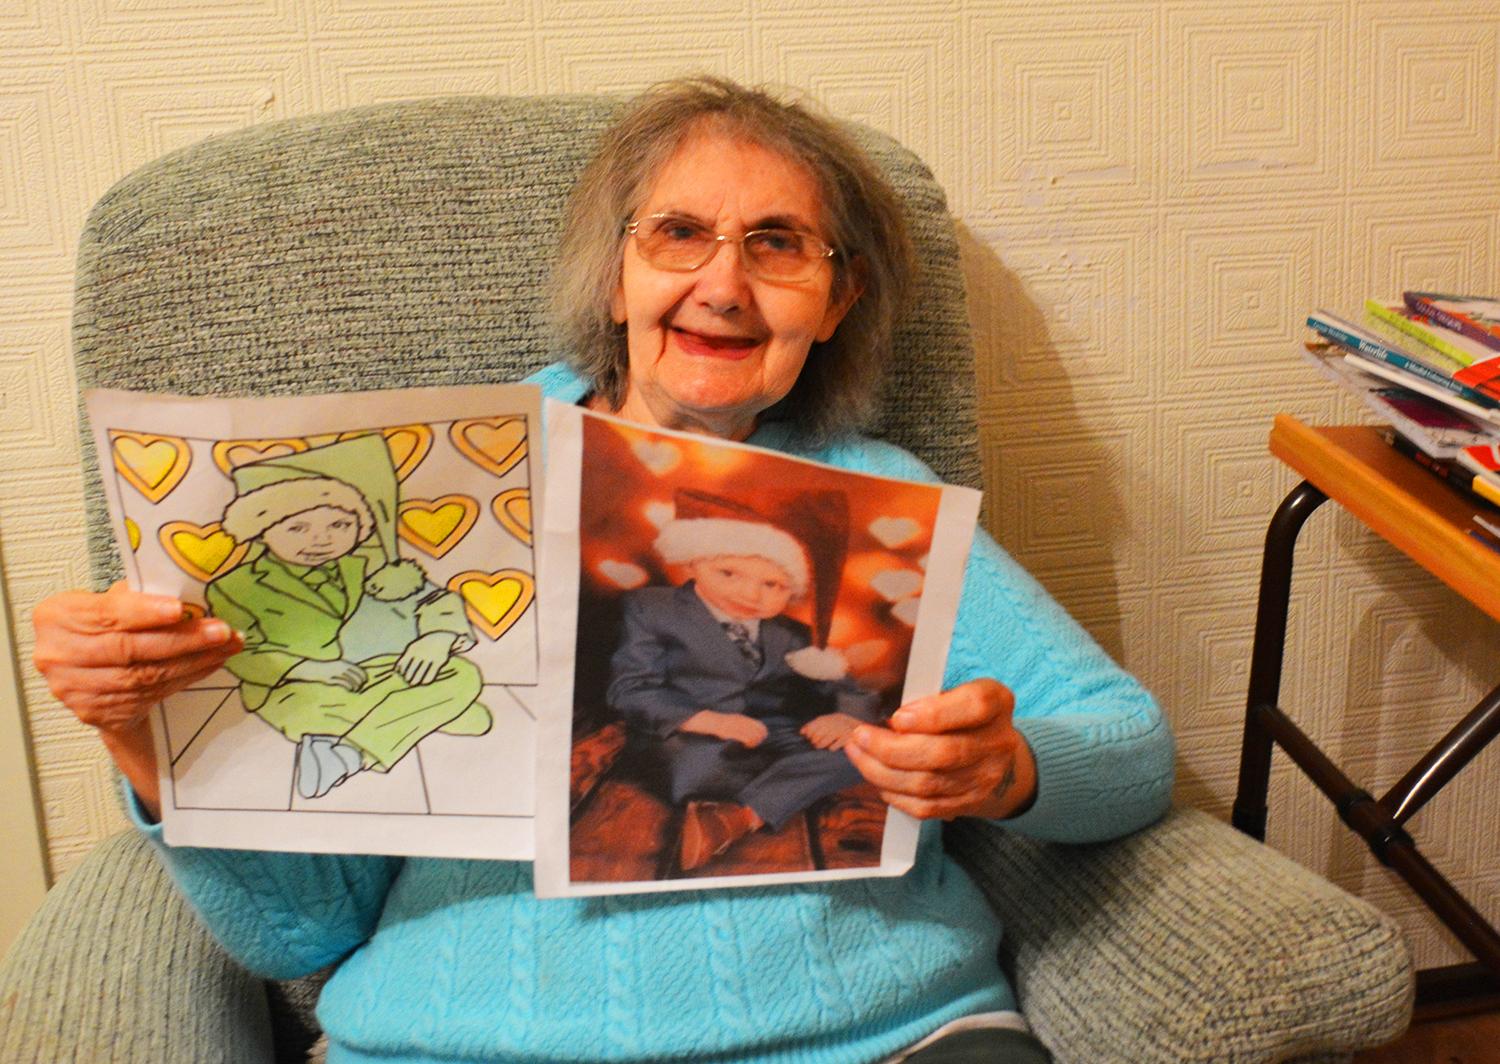 Woman holding up colouring art